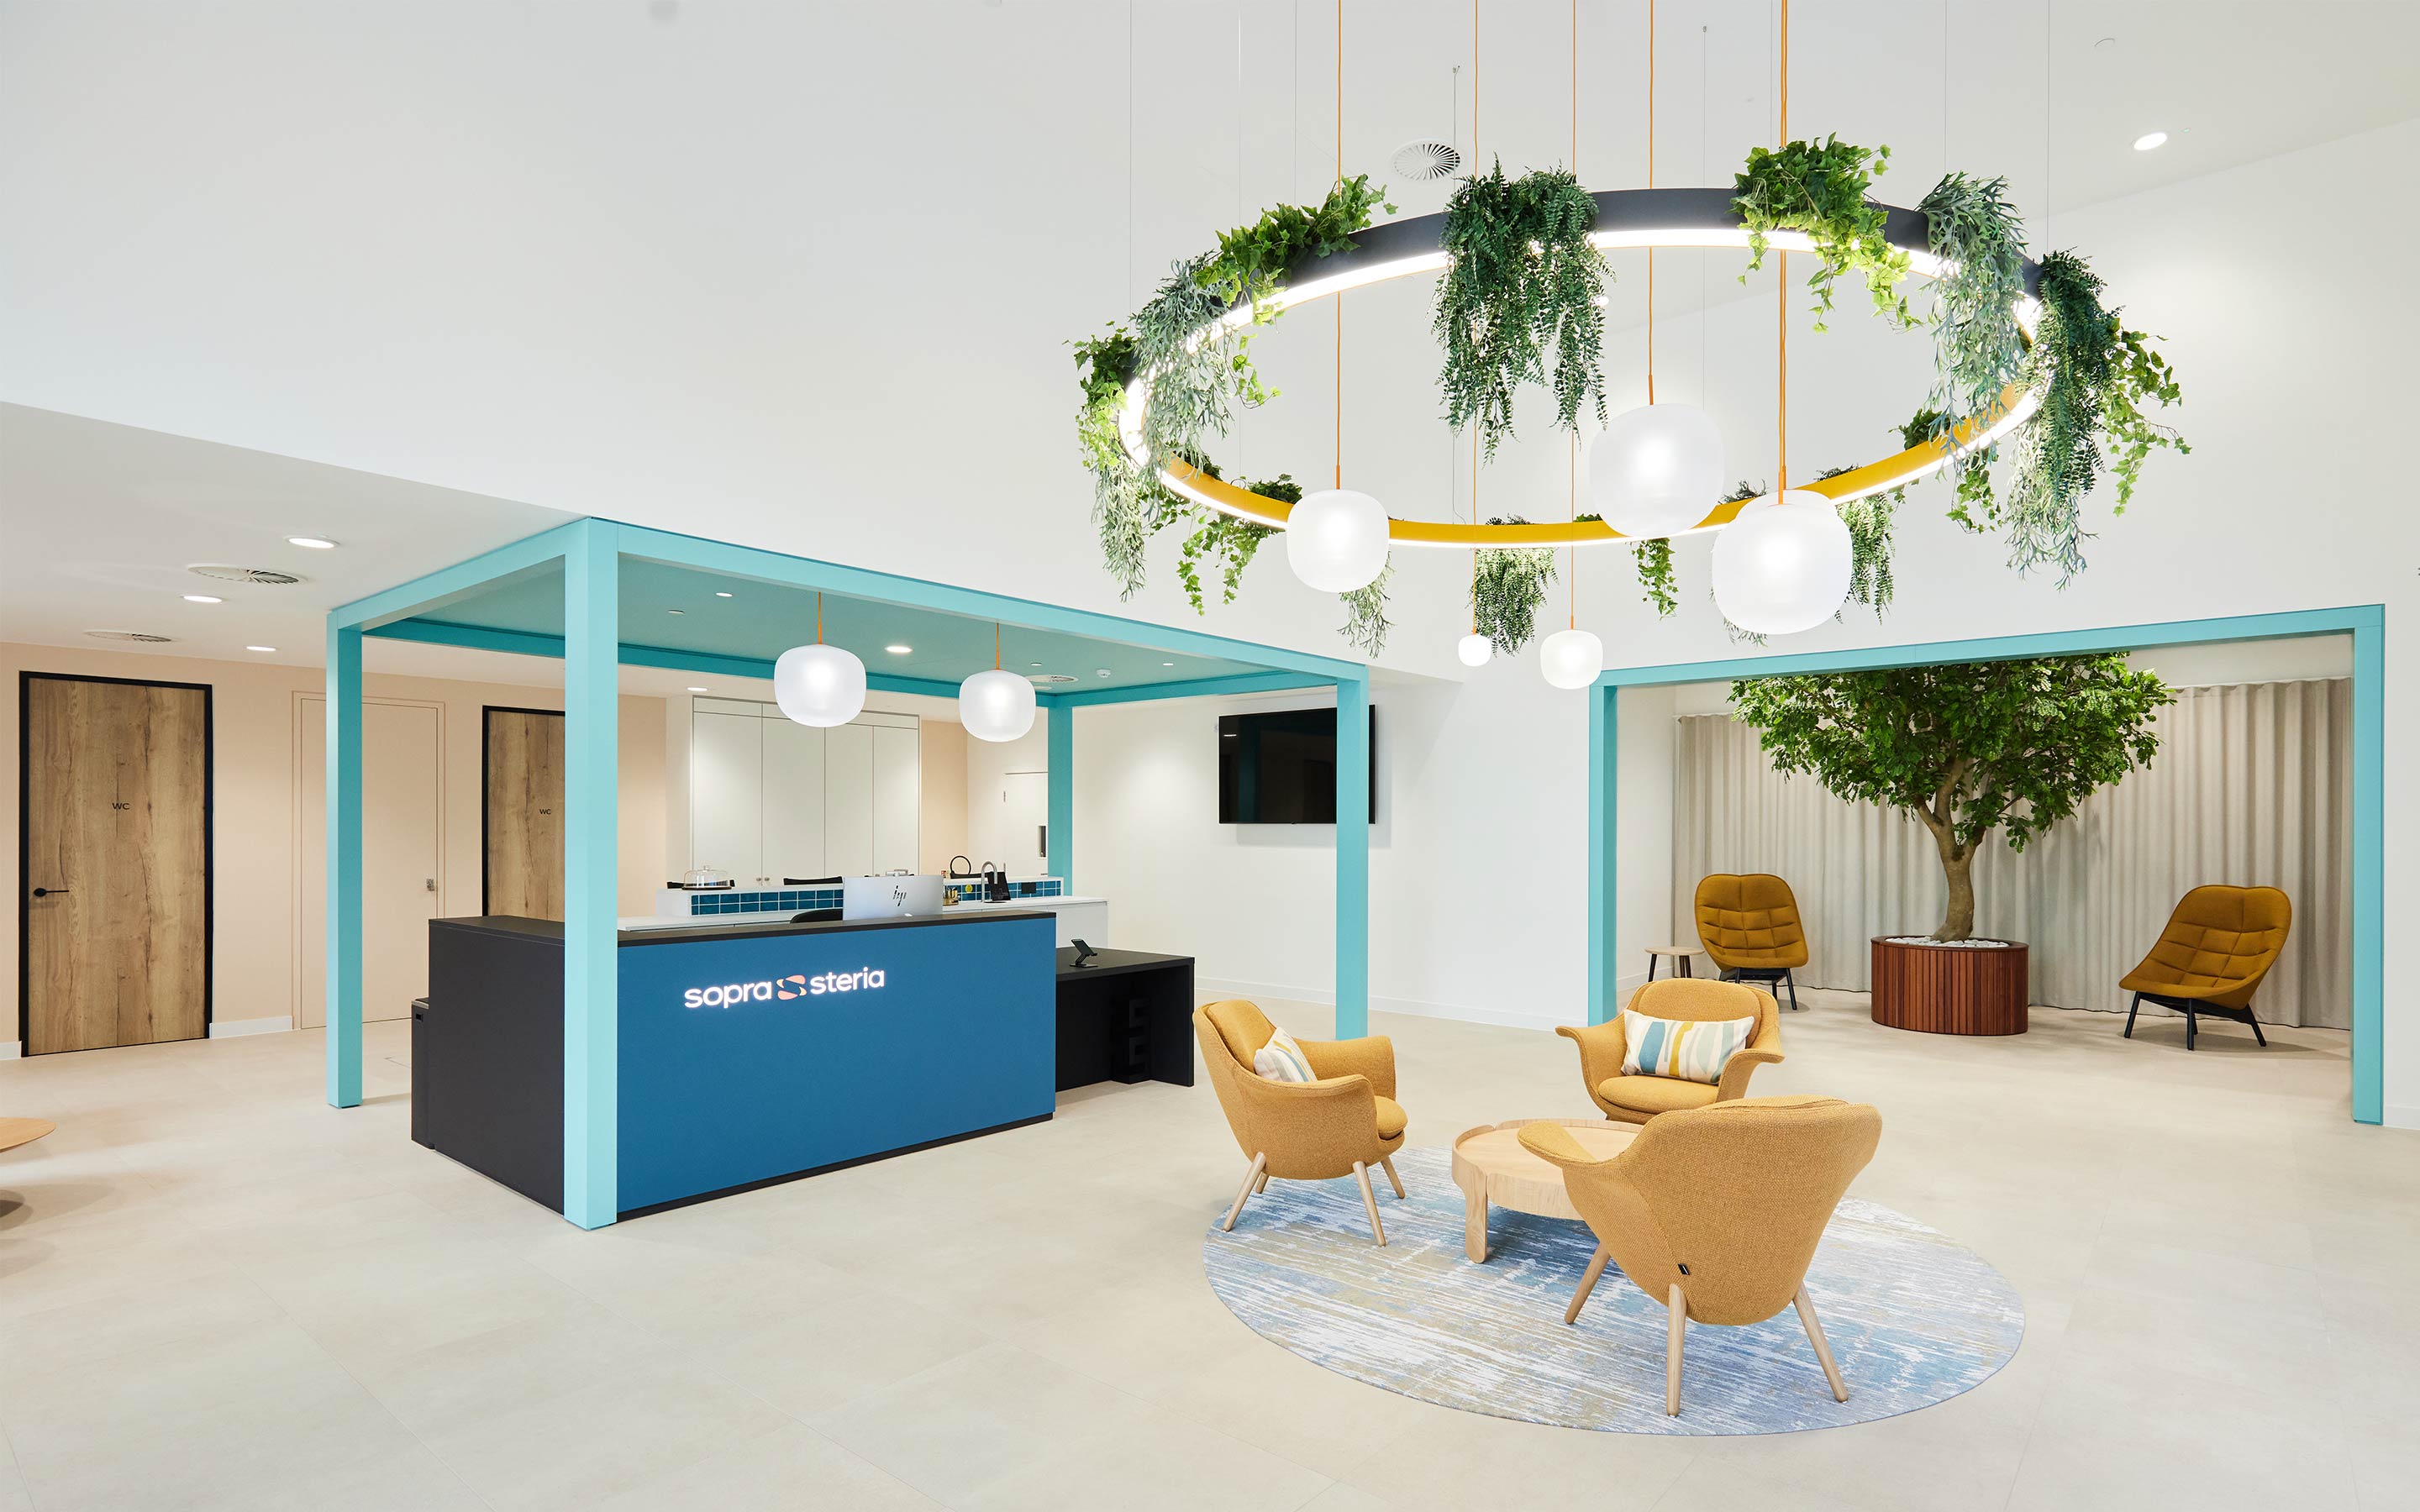 A large blue reception desk looks over a waiting area with soft seating and indoor planting